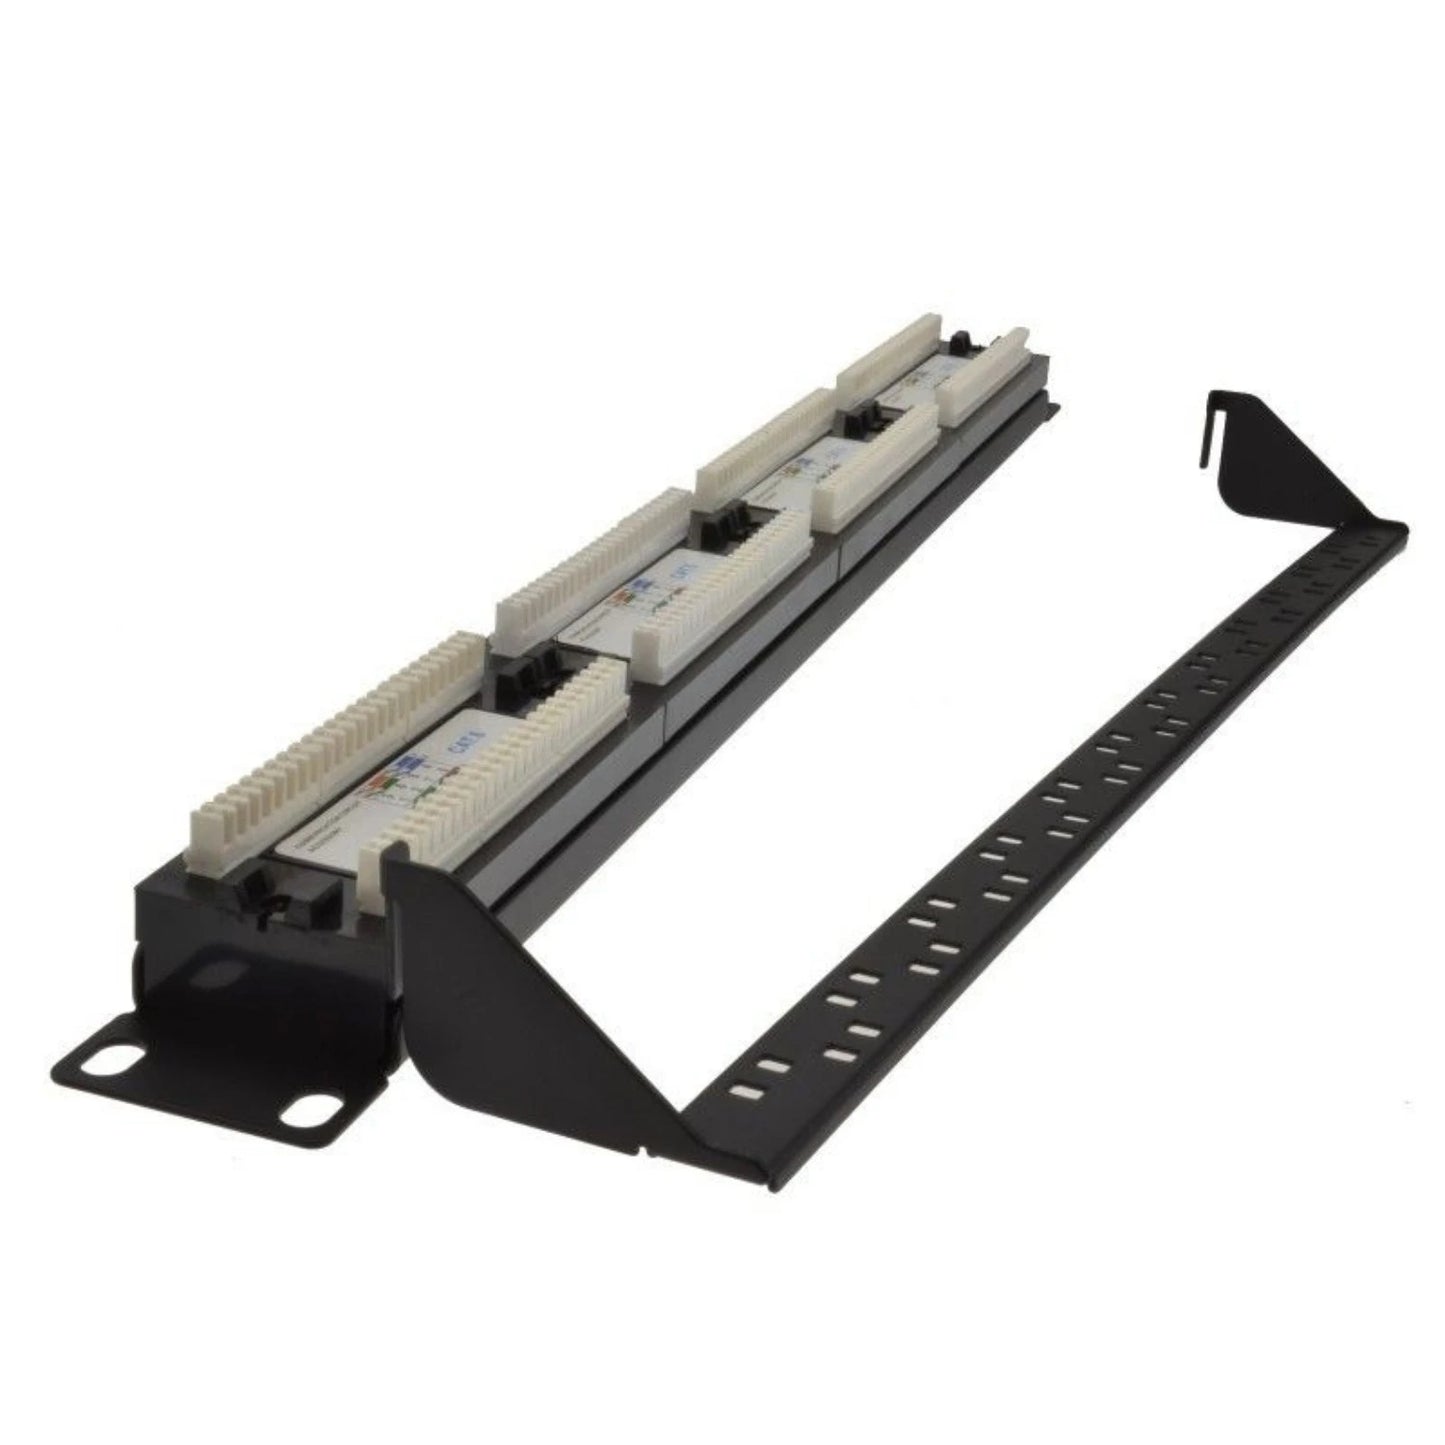 Rackmount UTP Patch Panel with Back Bar